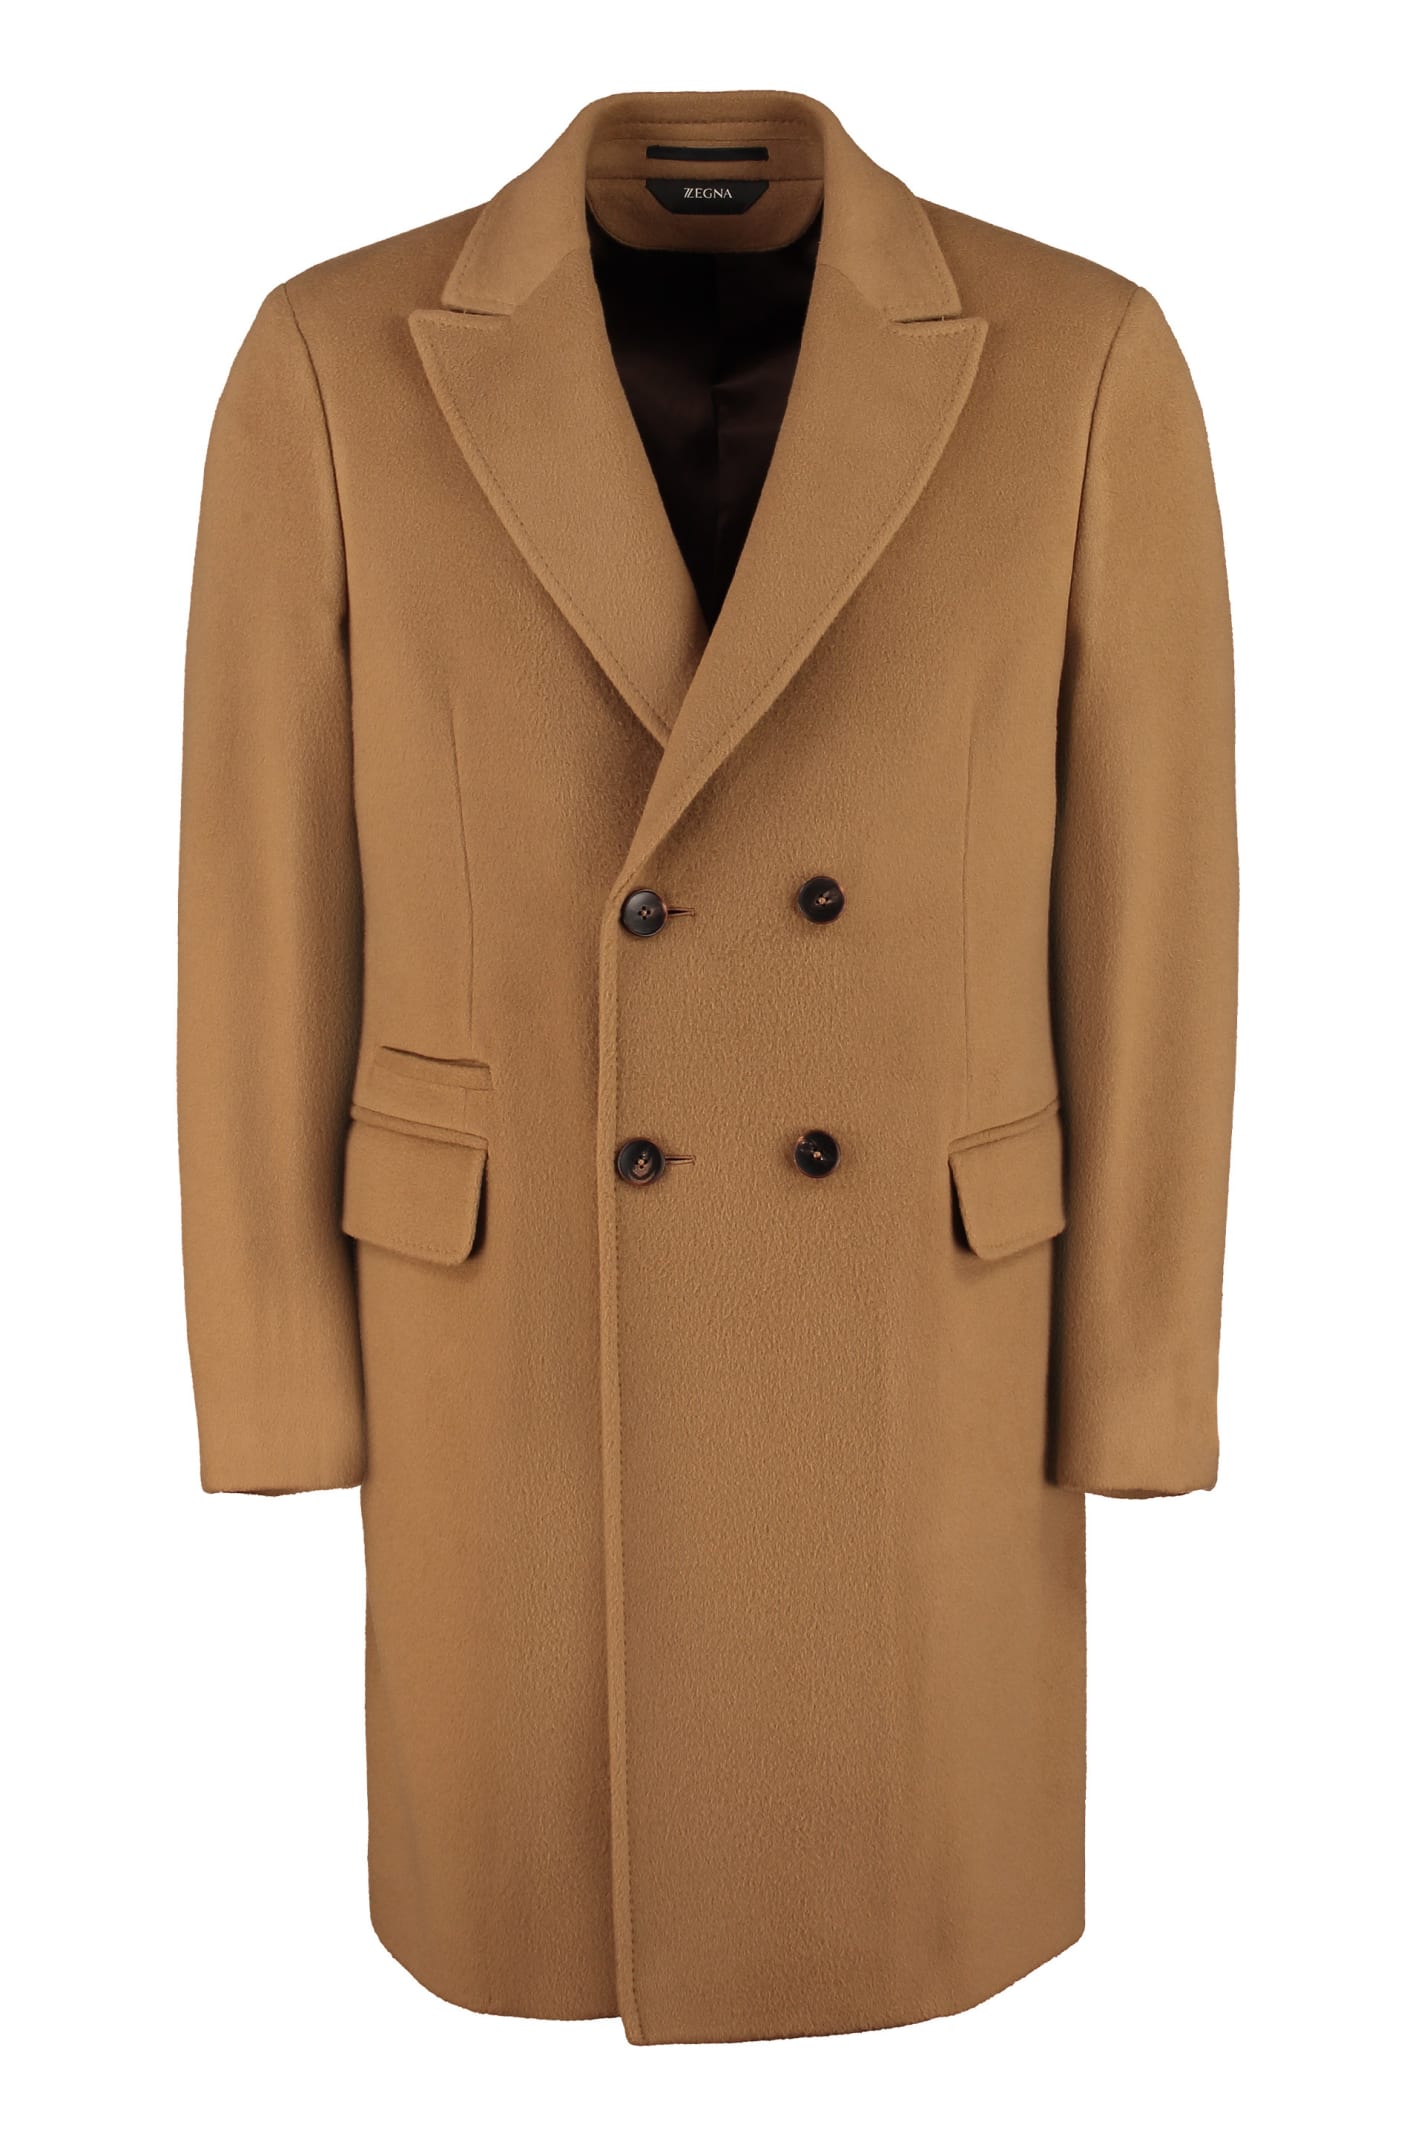 Z Zegna Double-breasted Wool And Cashmere Coat